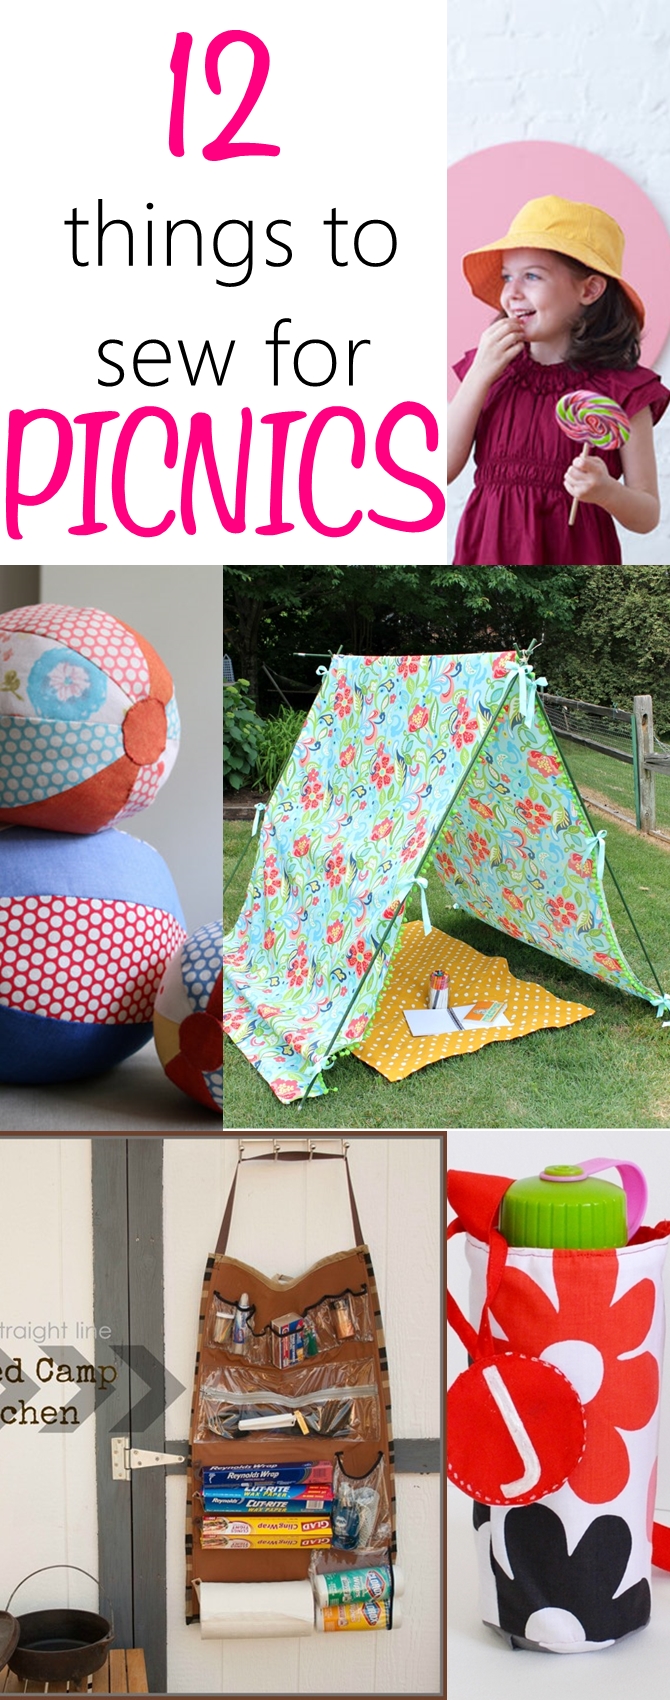 Things to sew for a PERFECT picnic. Make your summer picnics more fun with these awesome things to sew for picnics. Tutorial for picnic blankets, hats, tents, fabric balls. READ NOW!